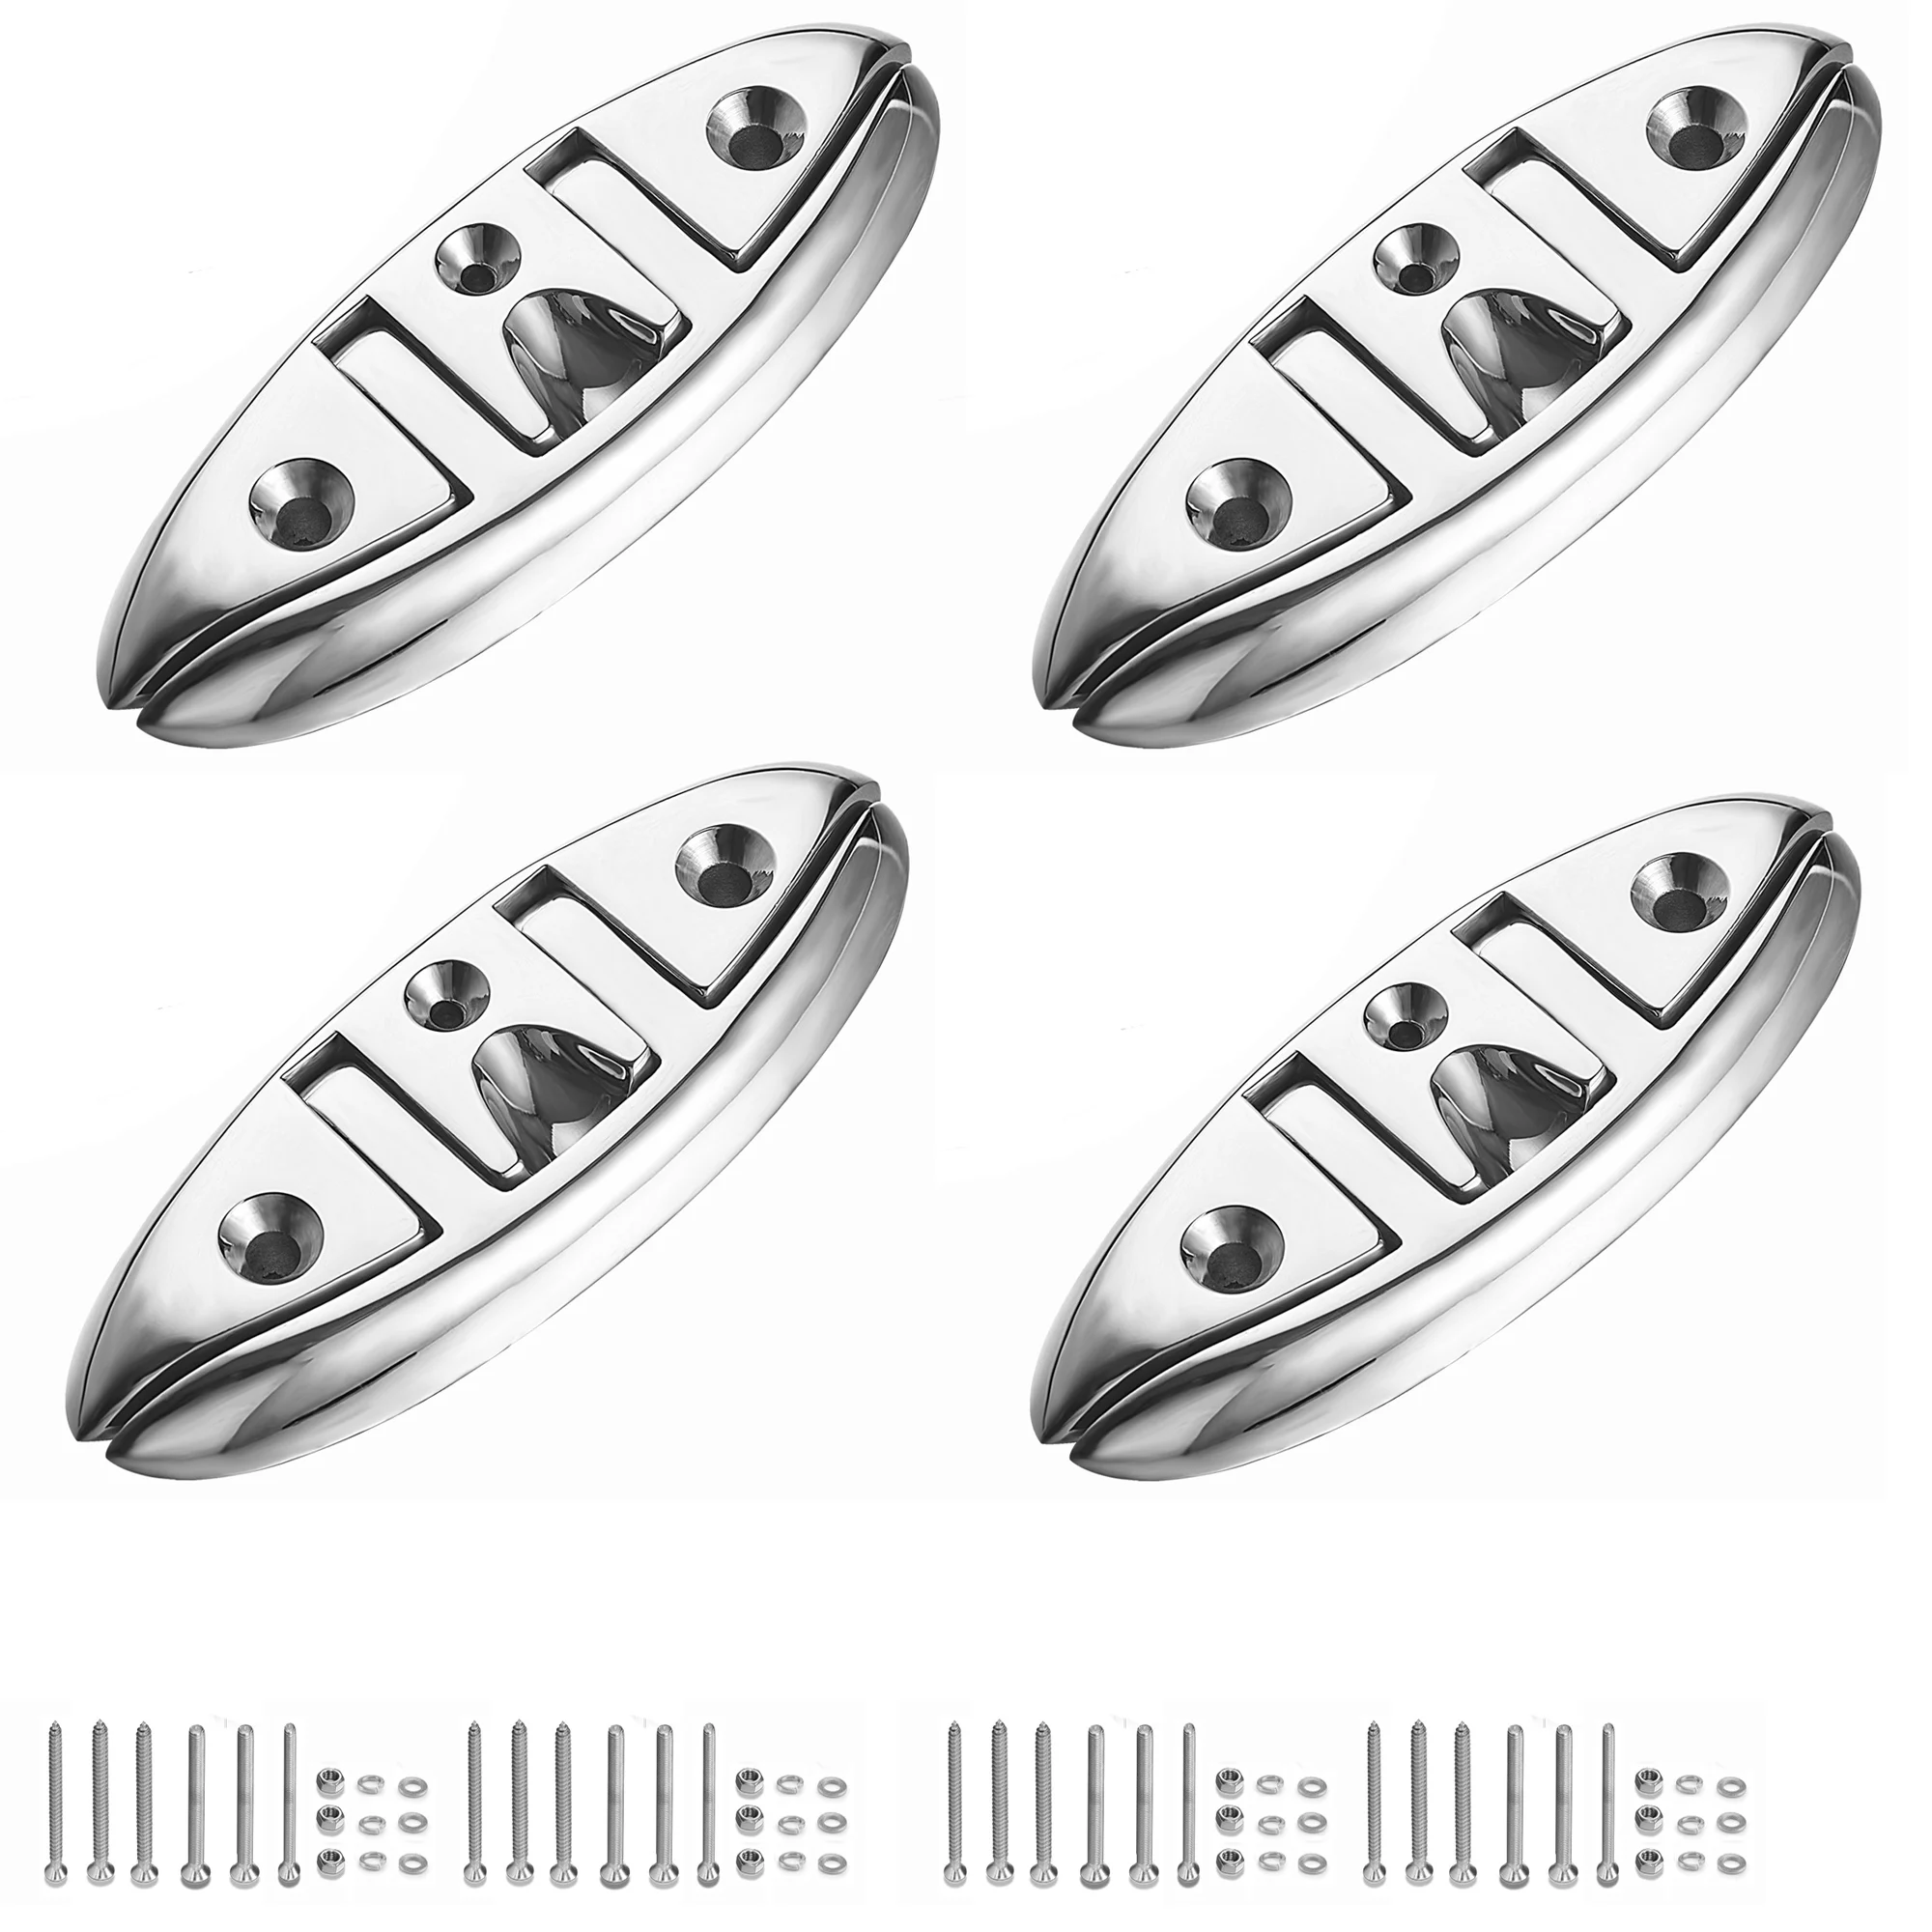 Boat Folding Cleats 5 Inch 4 Packs, Flip-up Dock Cleats, Boat Cleats, 316 Stainless Steel, with Screws and Locking Nuts